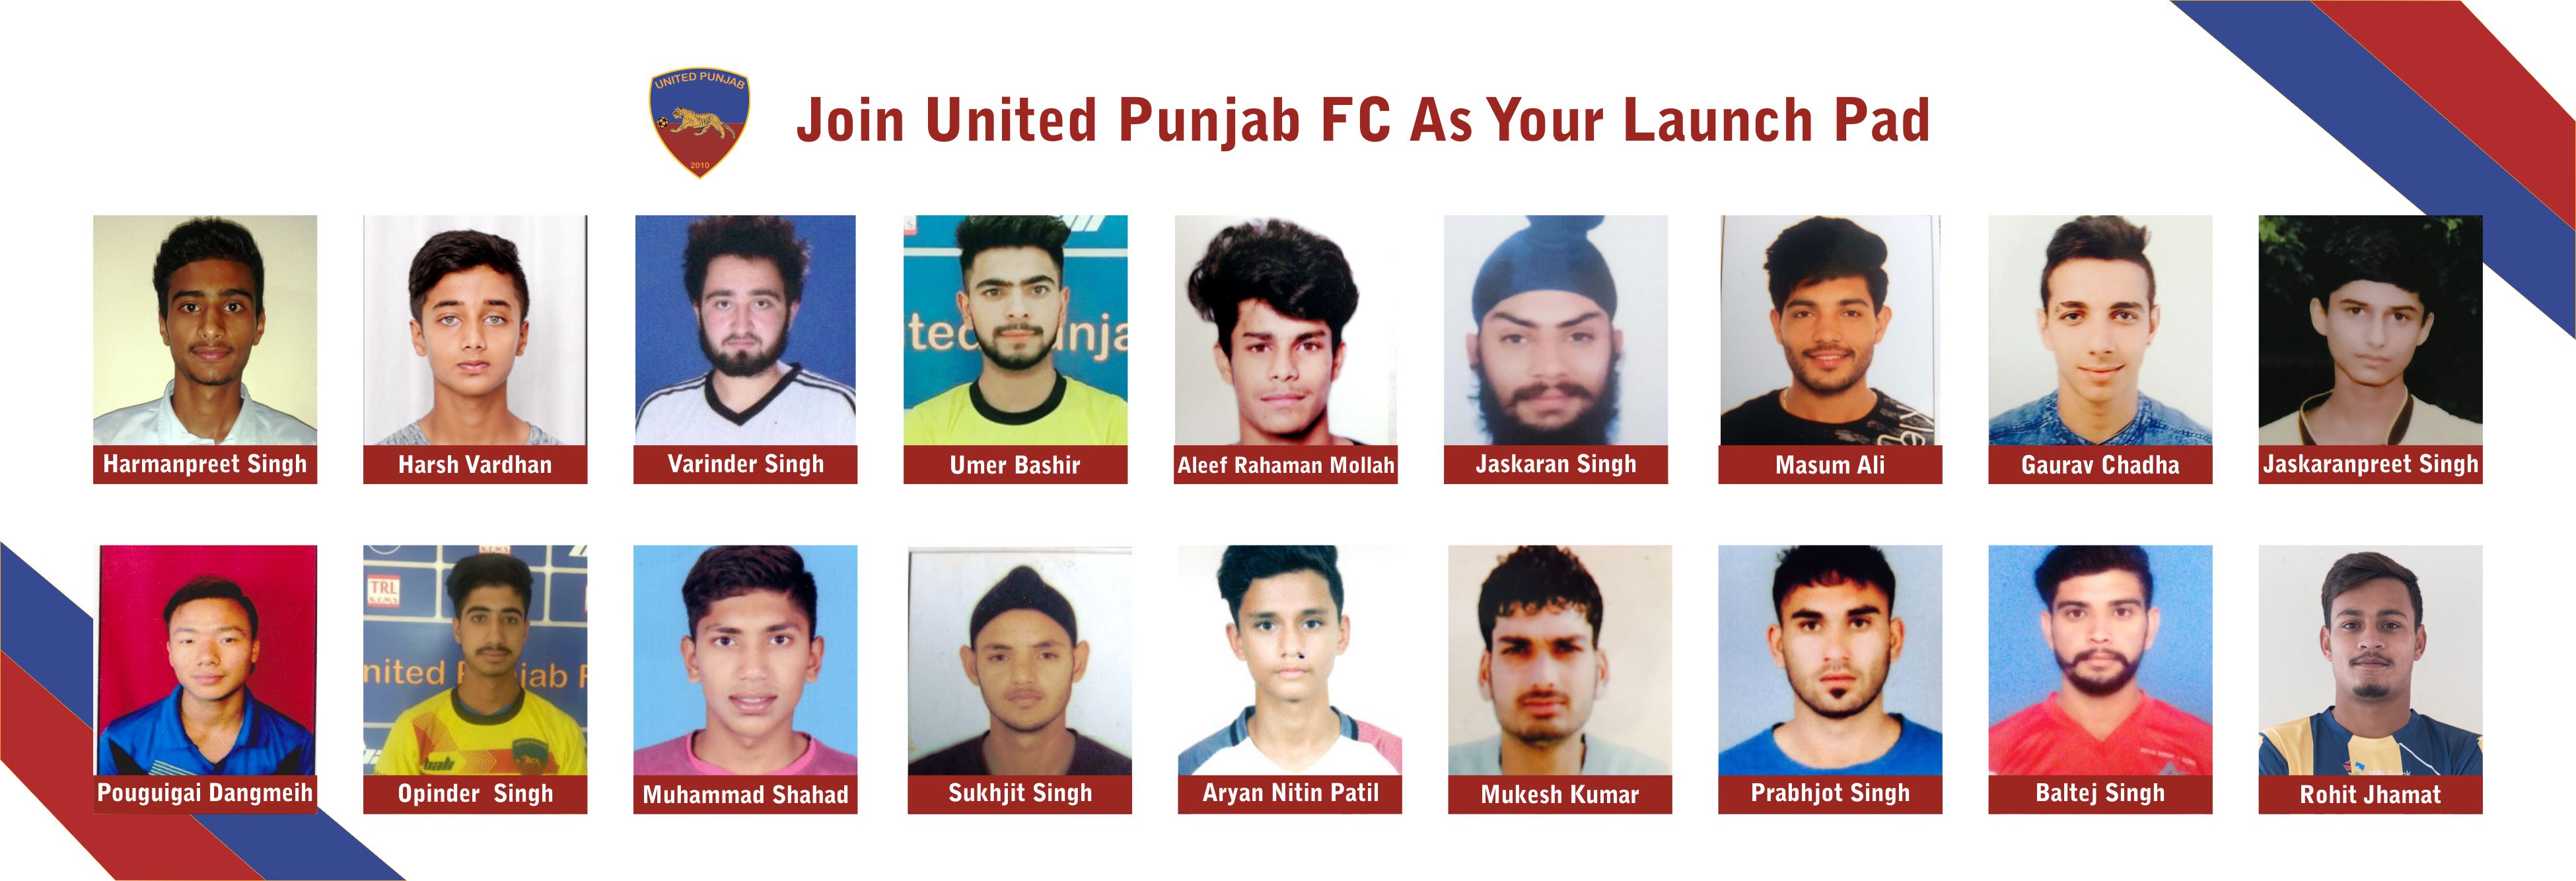 you-should-join-united-punjab-fc-as-your-launch-pad